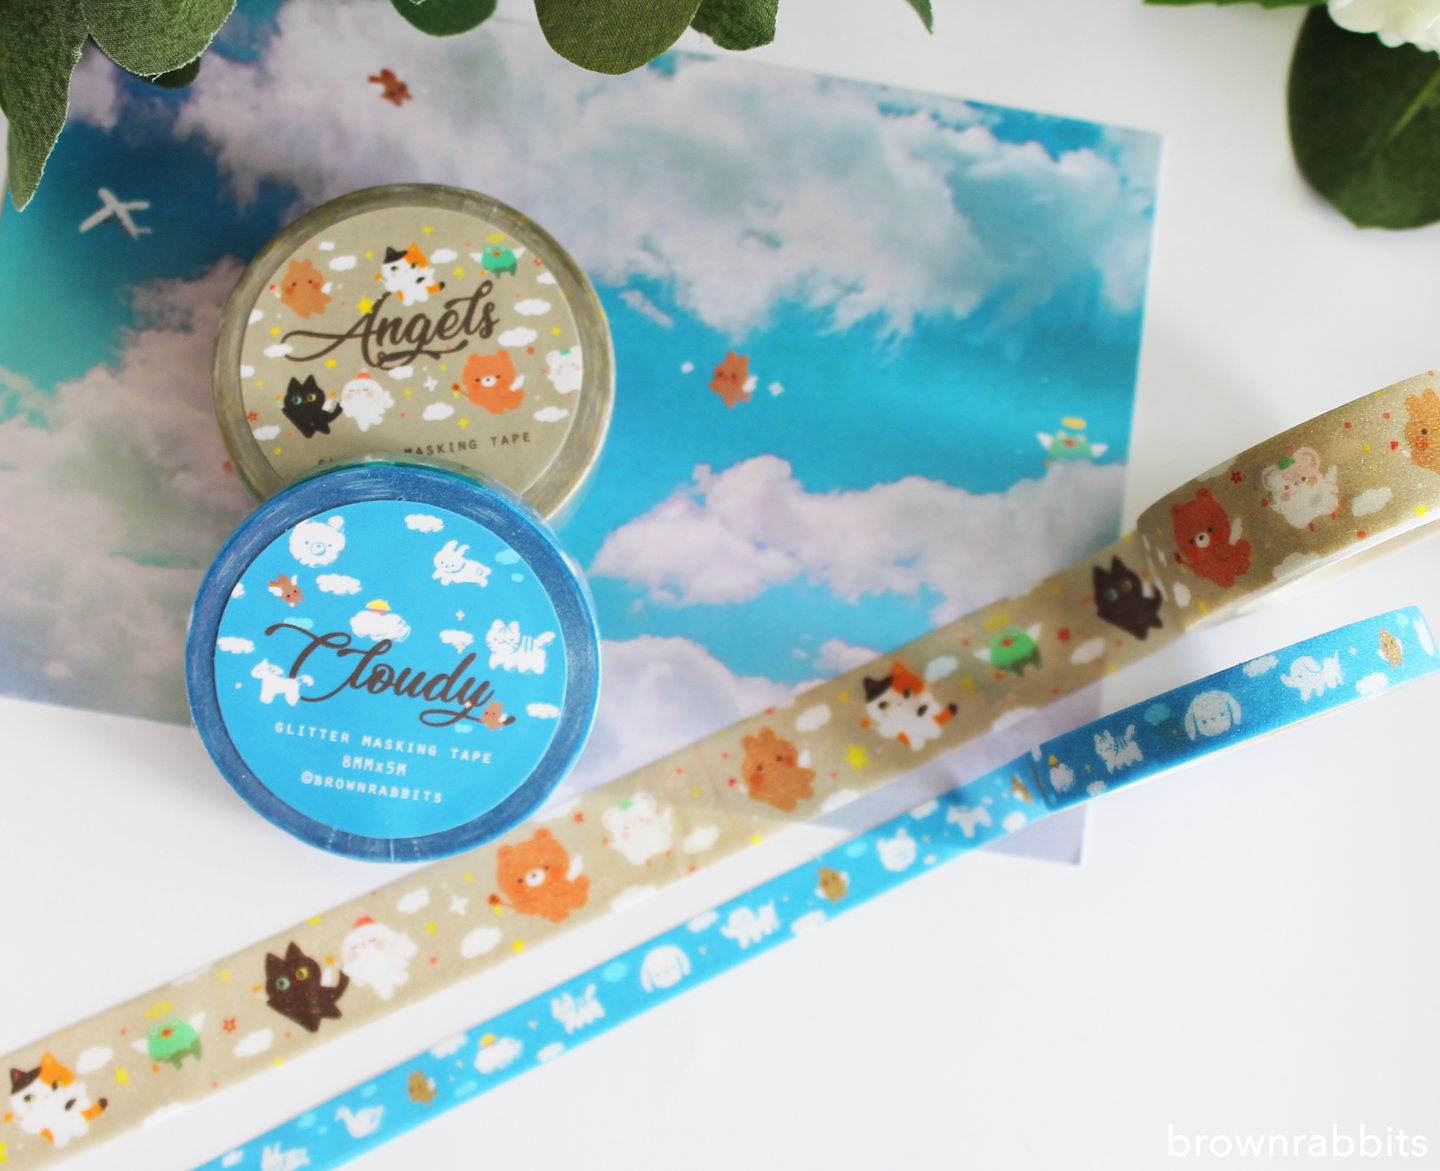 Angel and Cloudy Washi tapes